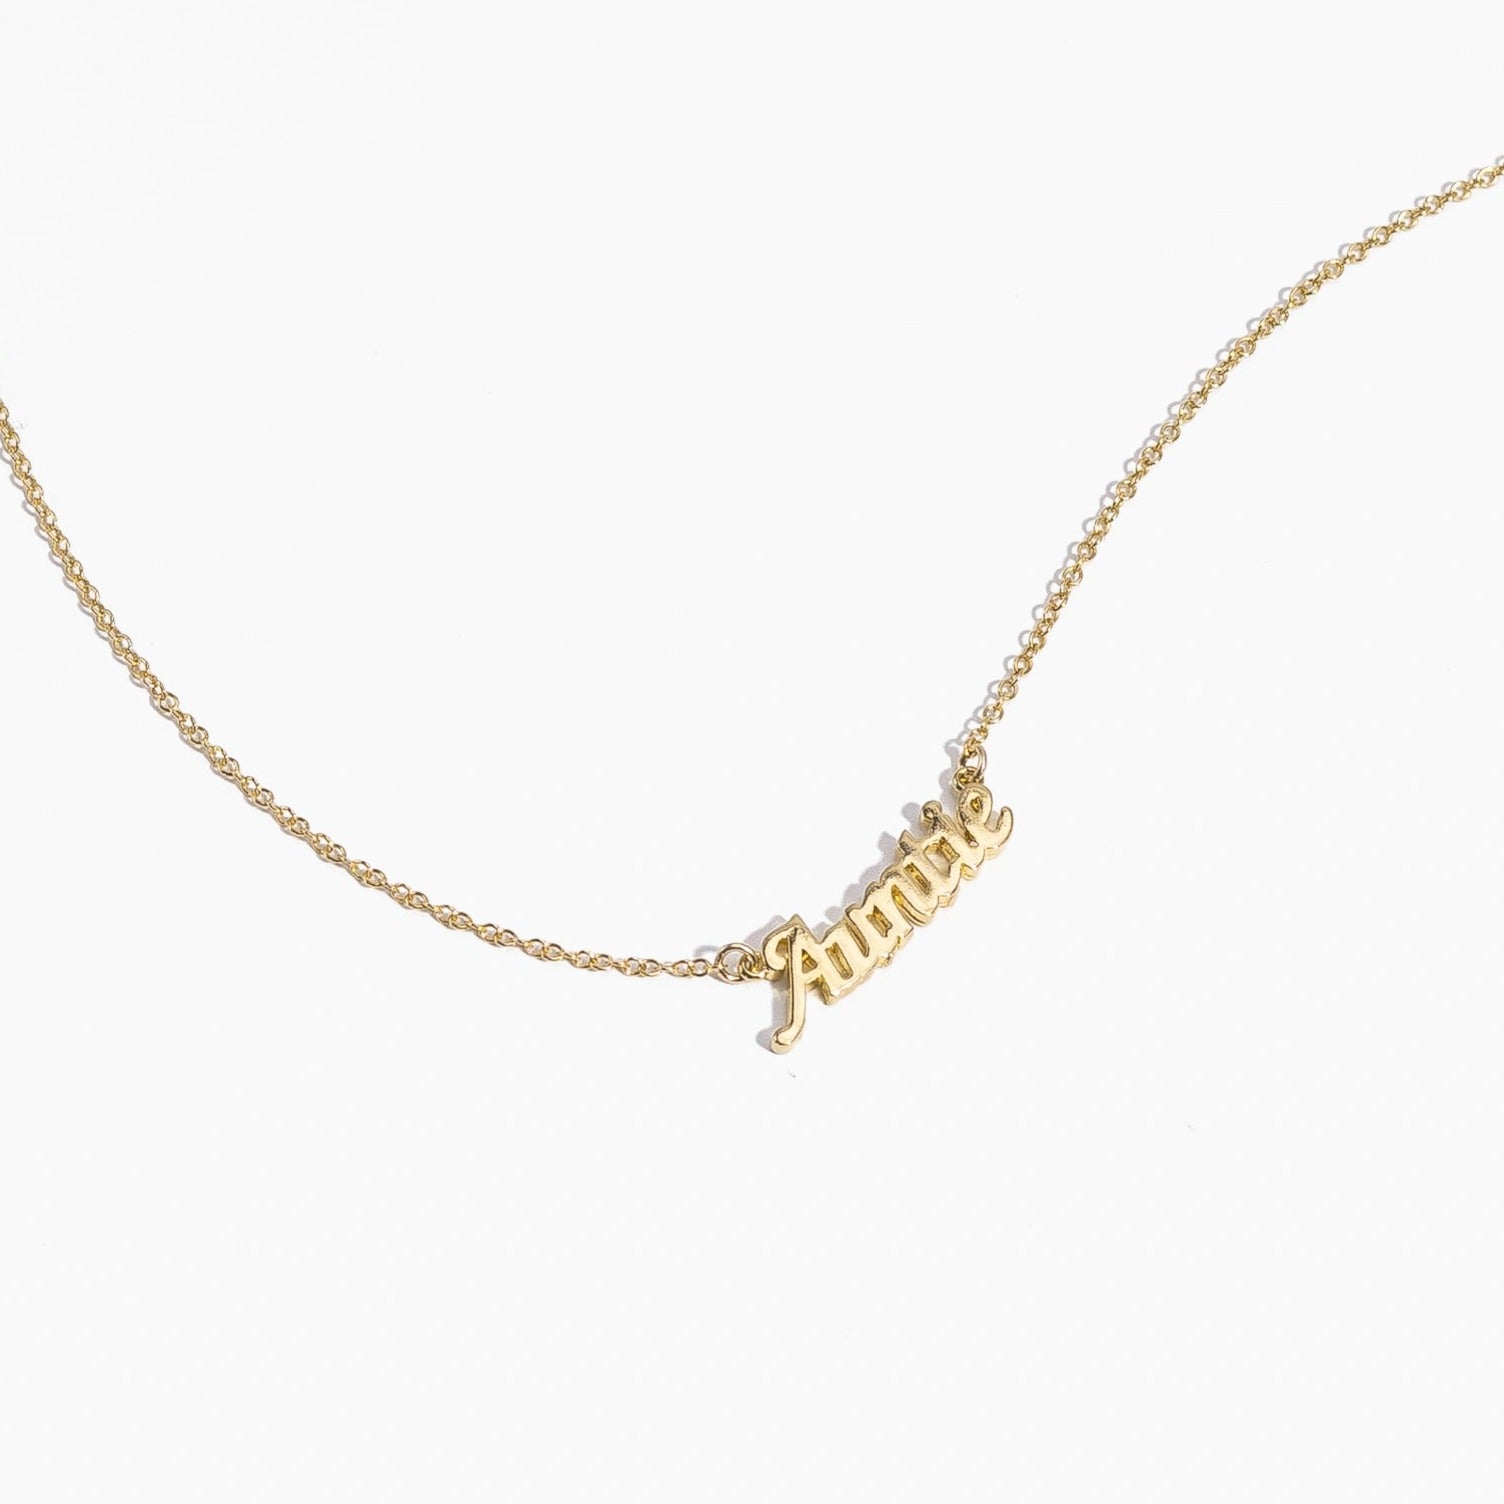 Gold Auntie Necklace by Katie Dean Jewelry, made in America, perfect for the dainty minimal jewelry lovers 